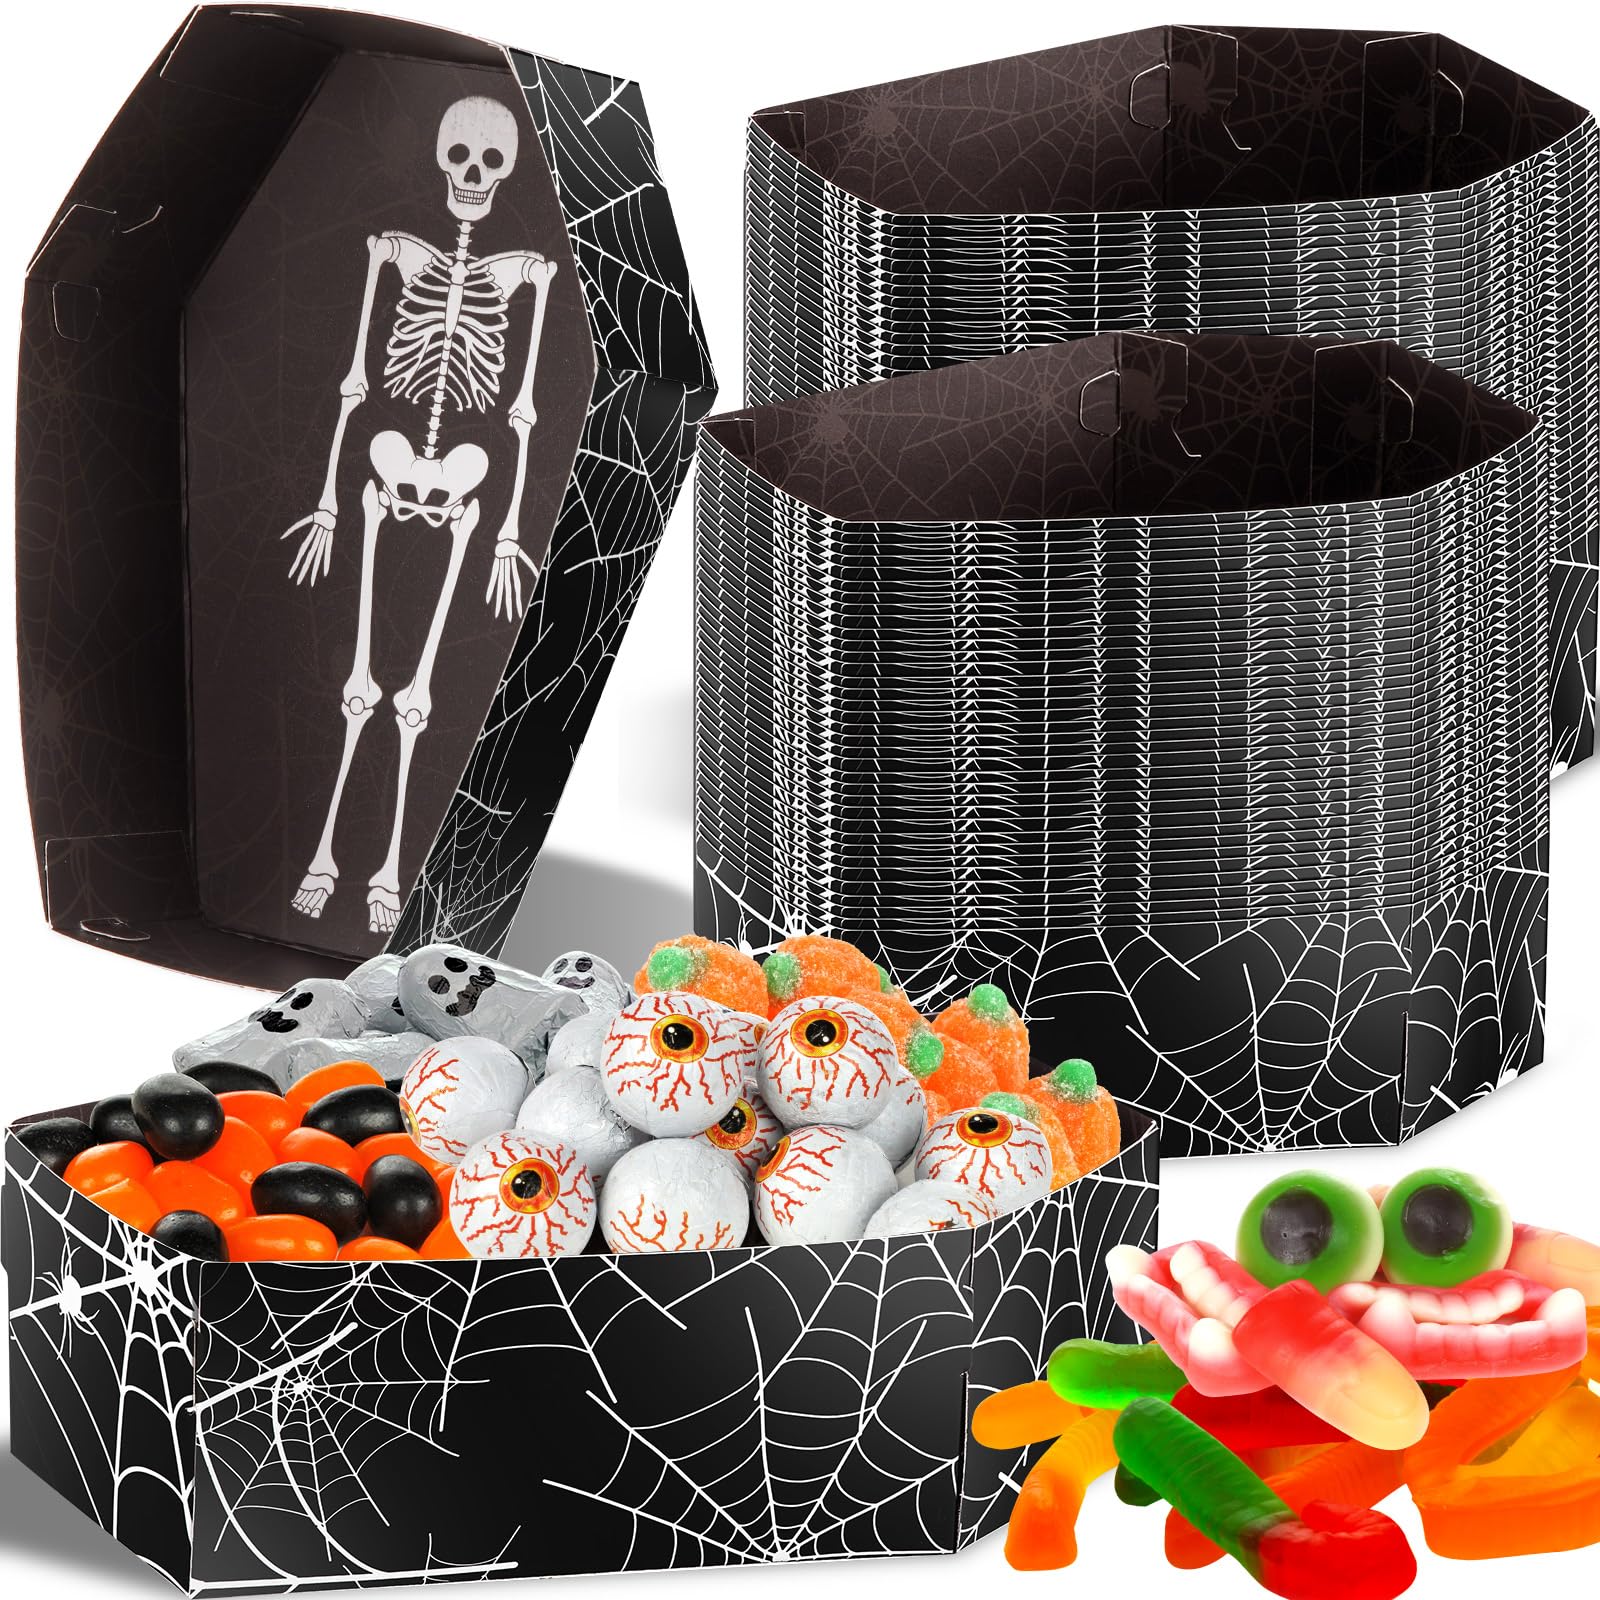 Tenceur 100 Pieces Halloween Coffin Snack Trays Halloween Party Food Supplies Coffin Boxes for Treats for Halloween Storage Charcuterie Board Serving Supplies